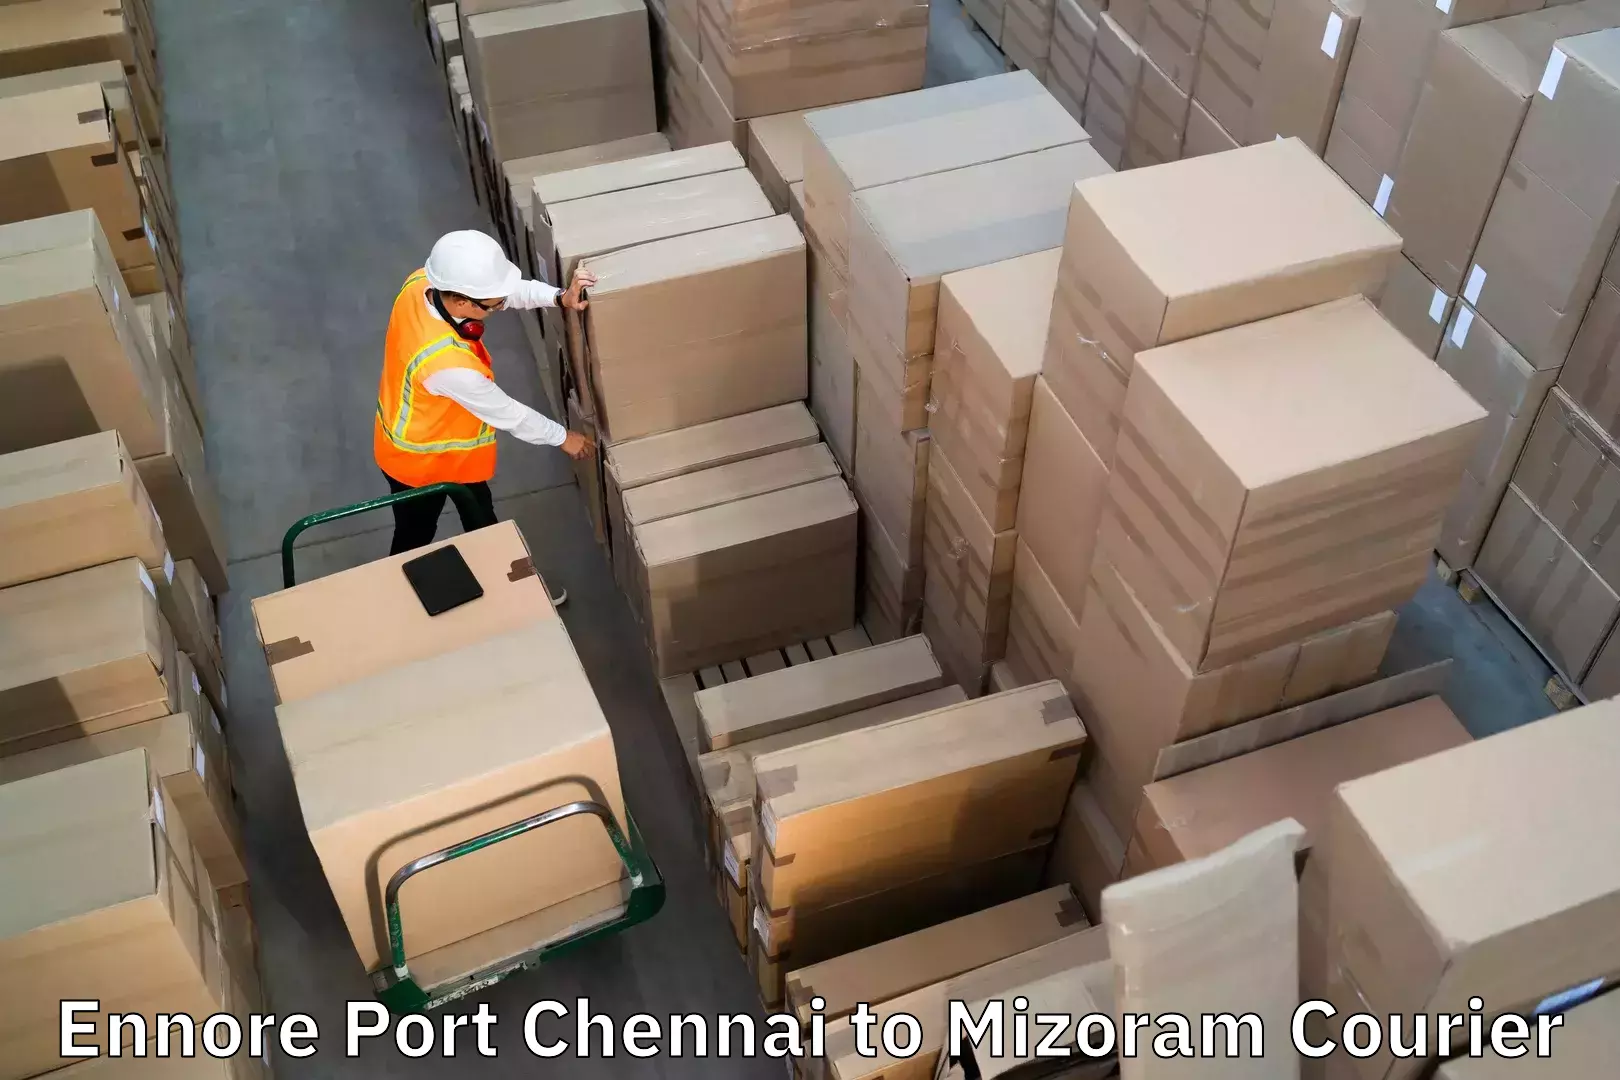 Baggage transport cost Ennore Port Chennai to Darlawn